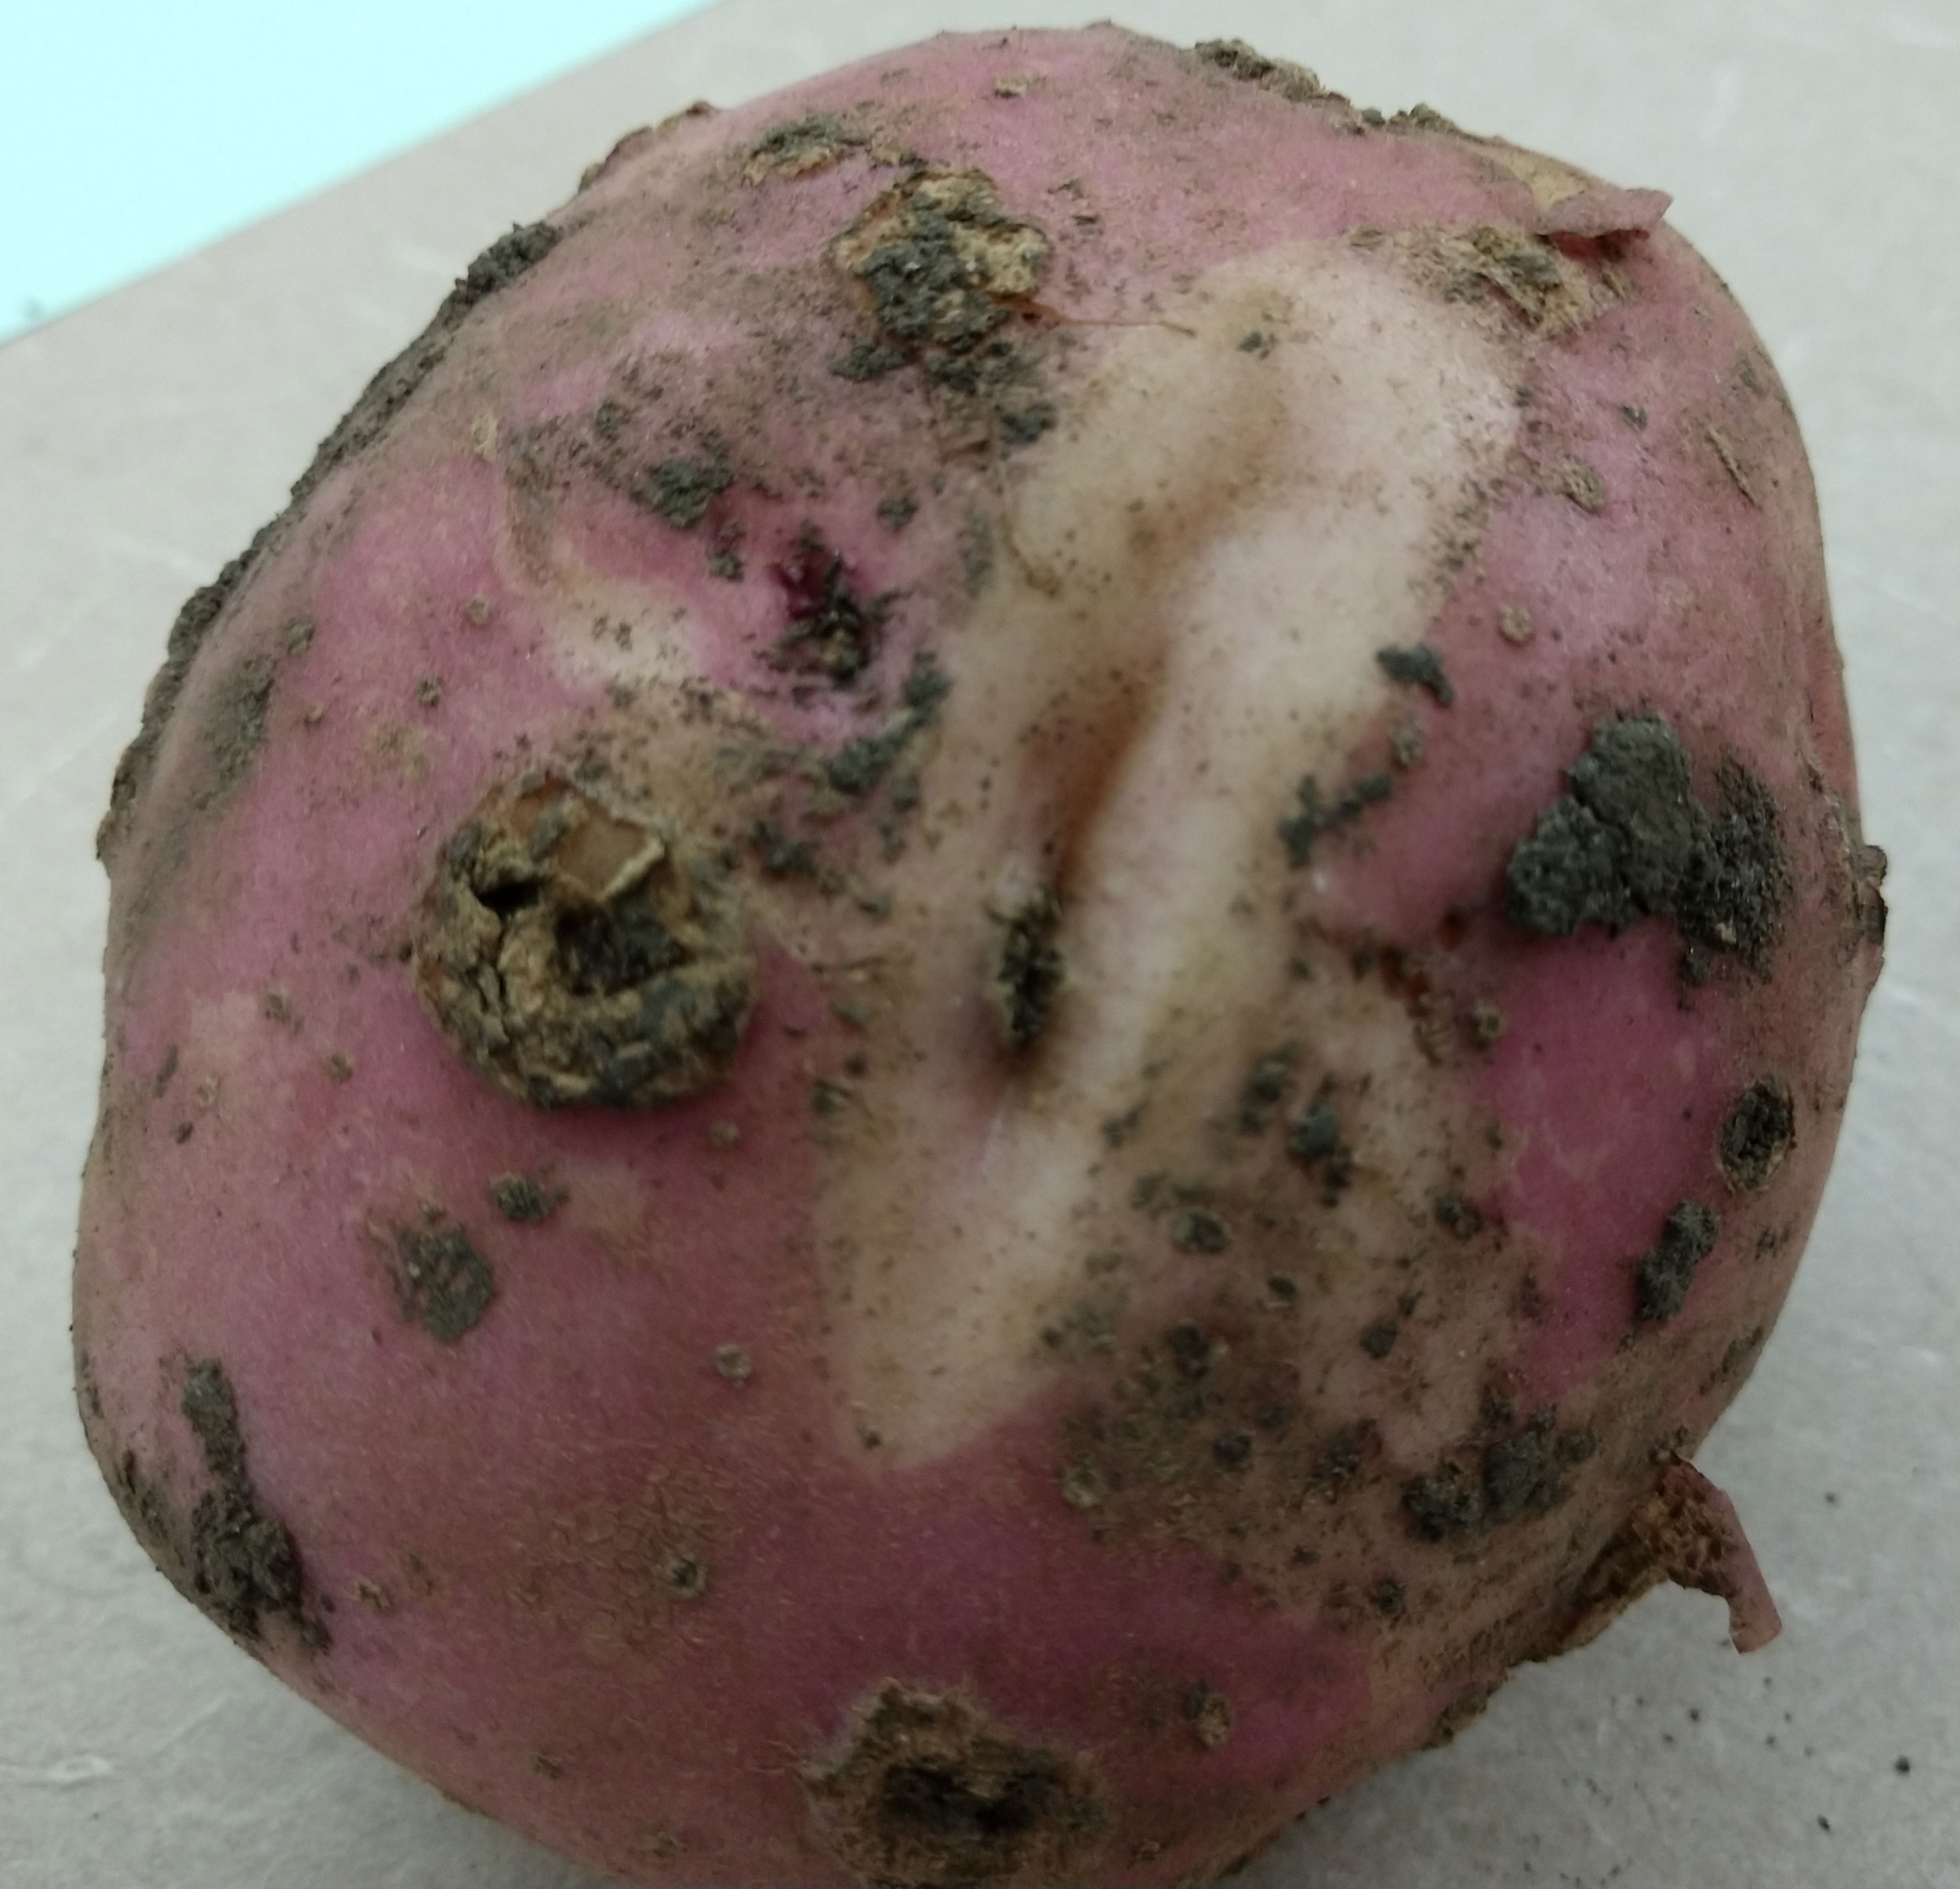 A red potato with brown, crusty scabs and a large crack in the middle revealing a white inside.